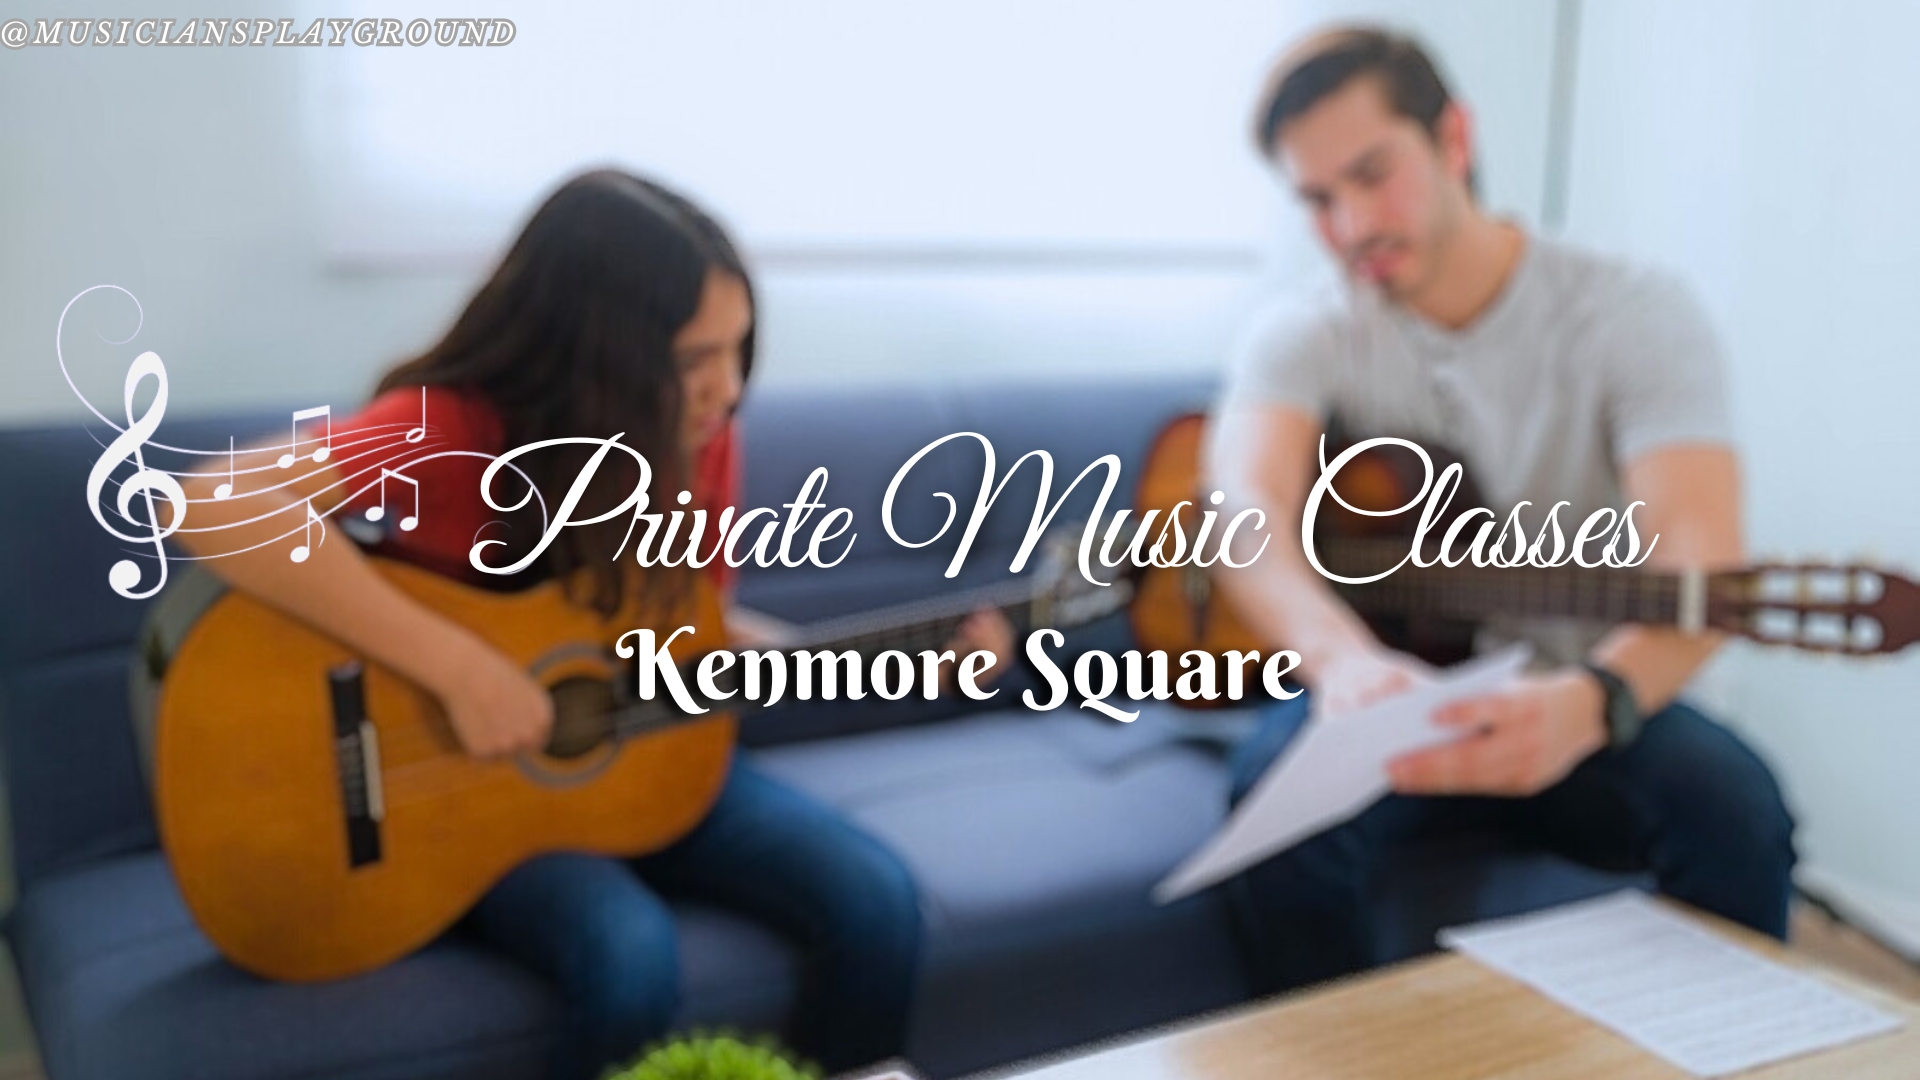 Welcome to Private Music Lessons in Kenmore Square, Massachusetts